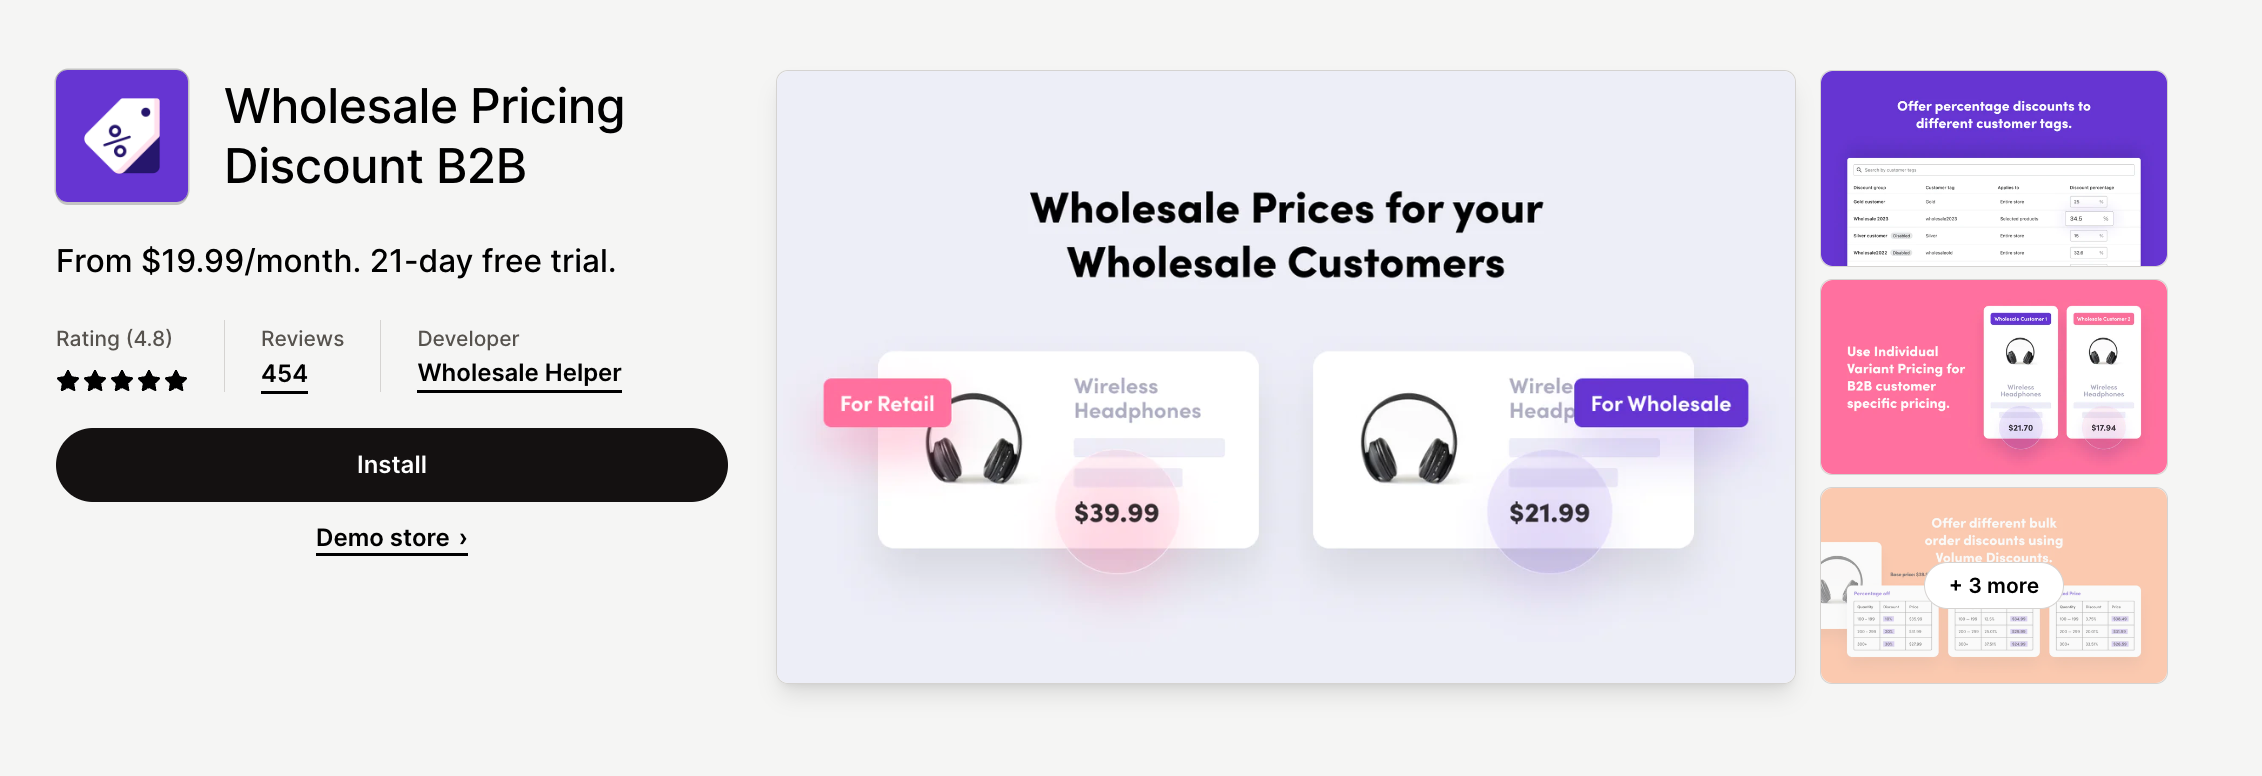 Wholesale Pricing Discount B2B